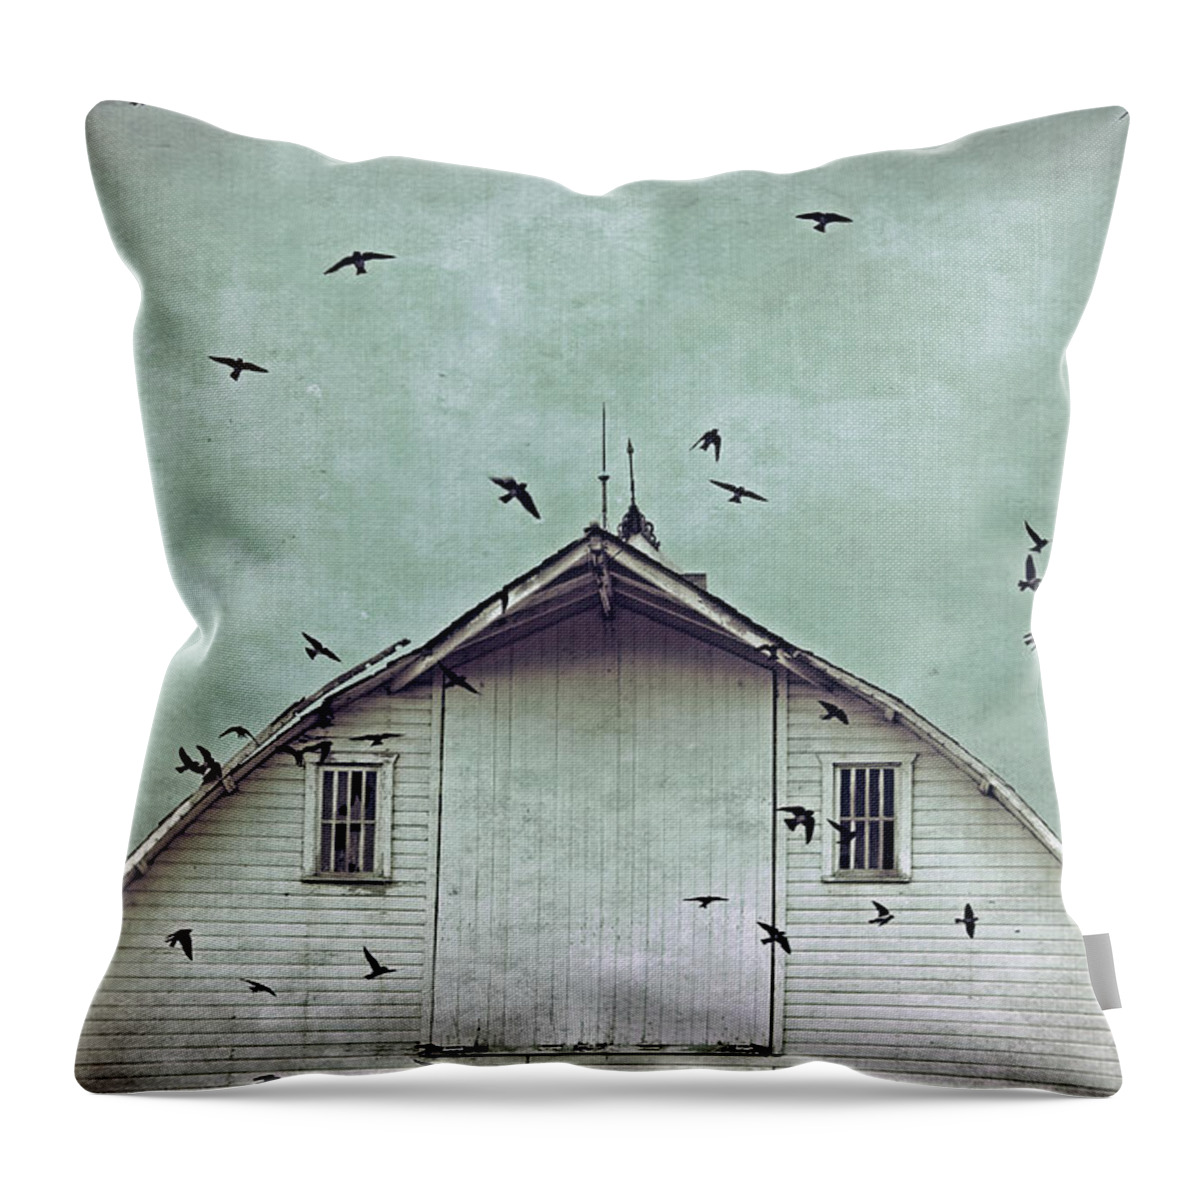 Top Selling Art Throw Pillow featuring the photograph Busy Barn by Julie Hamilton